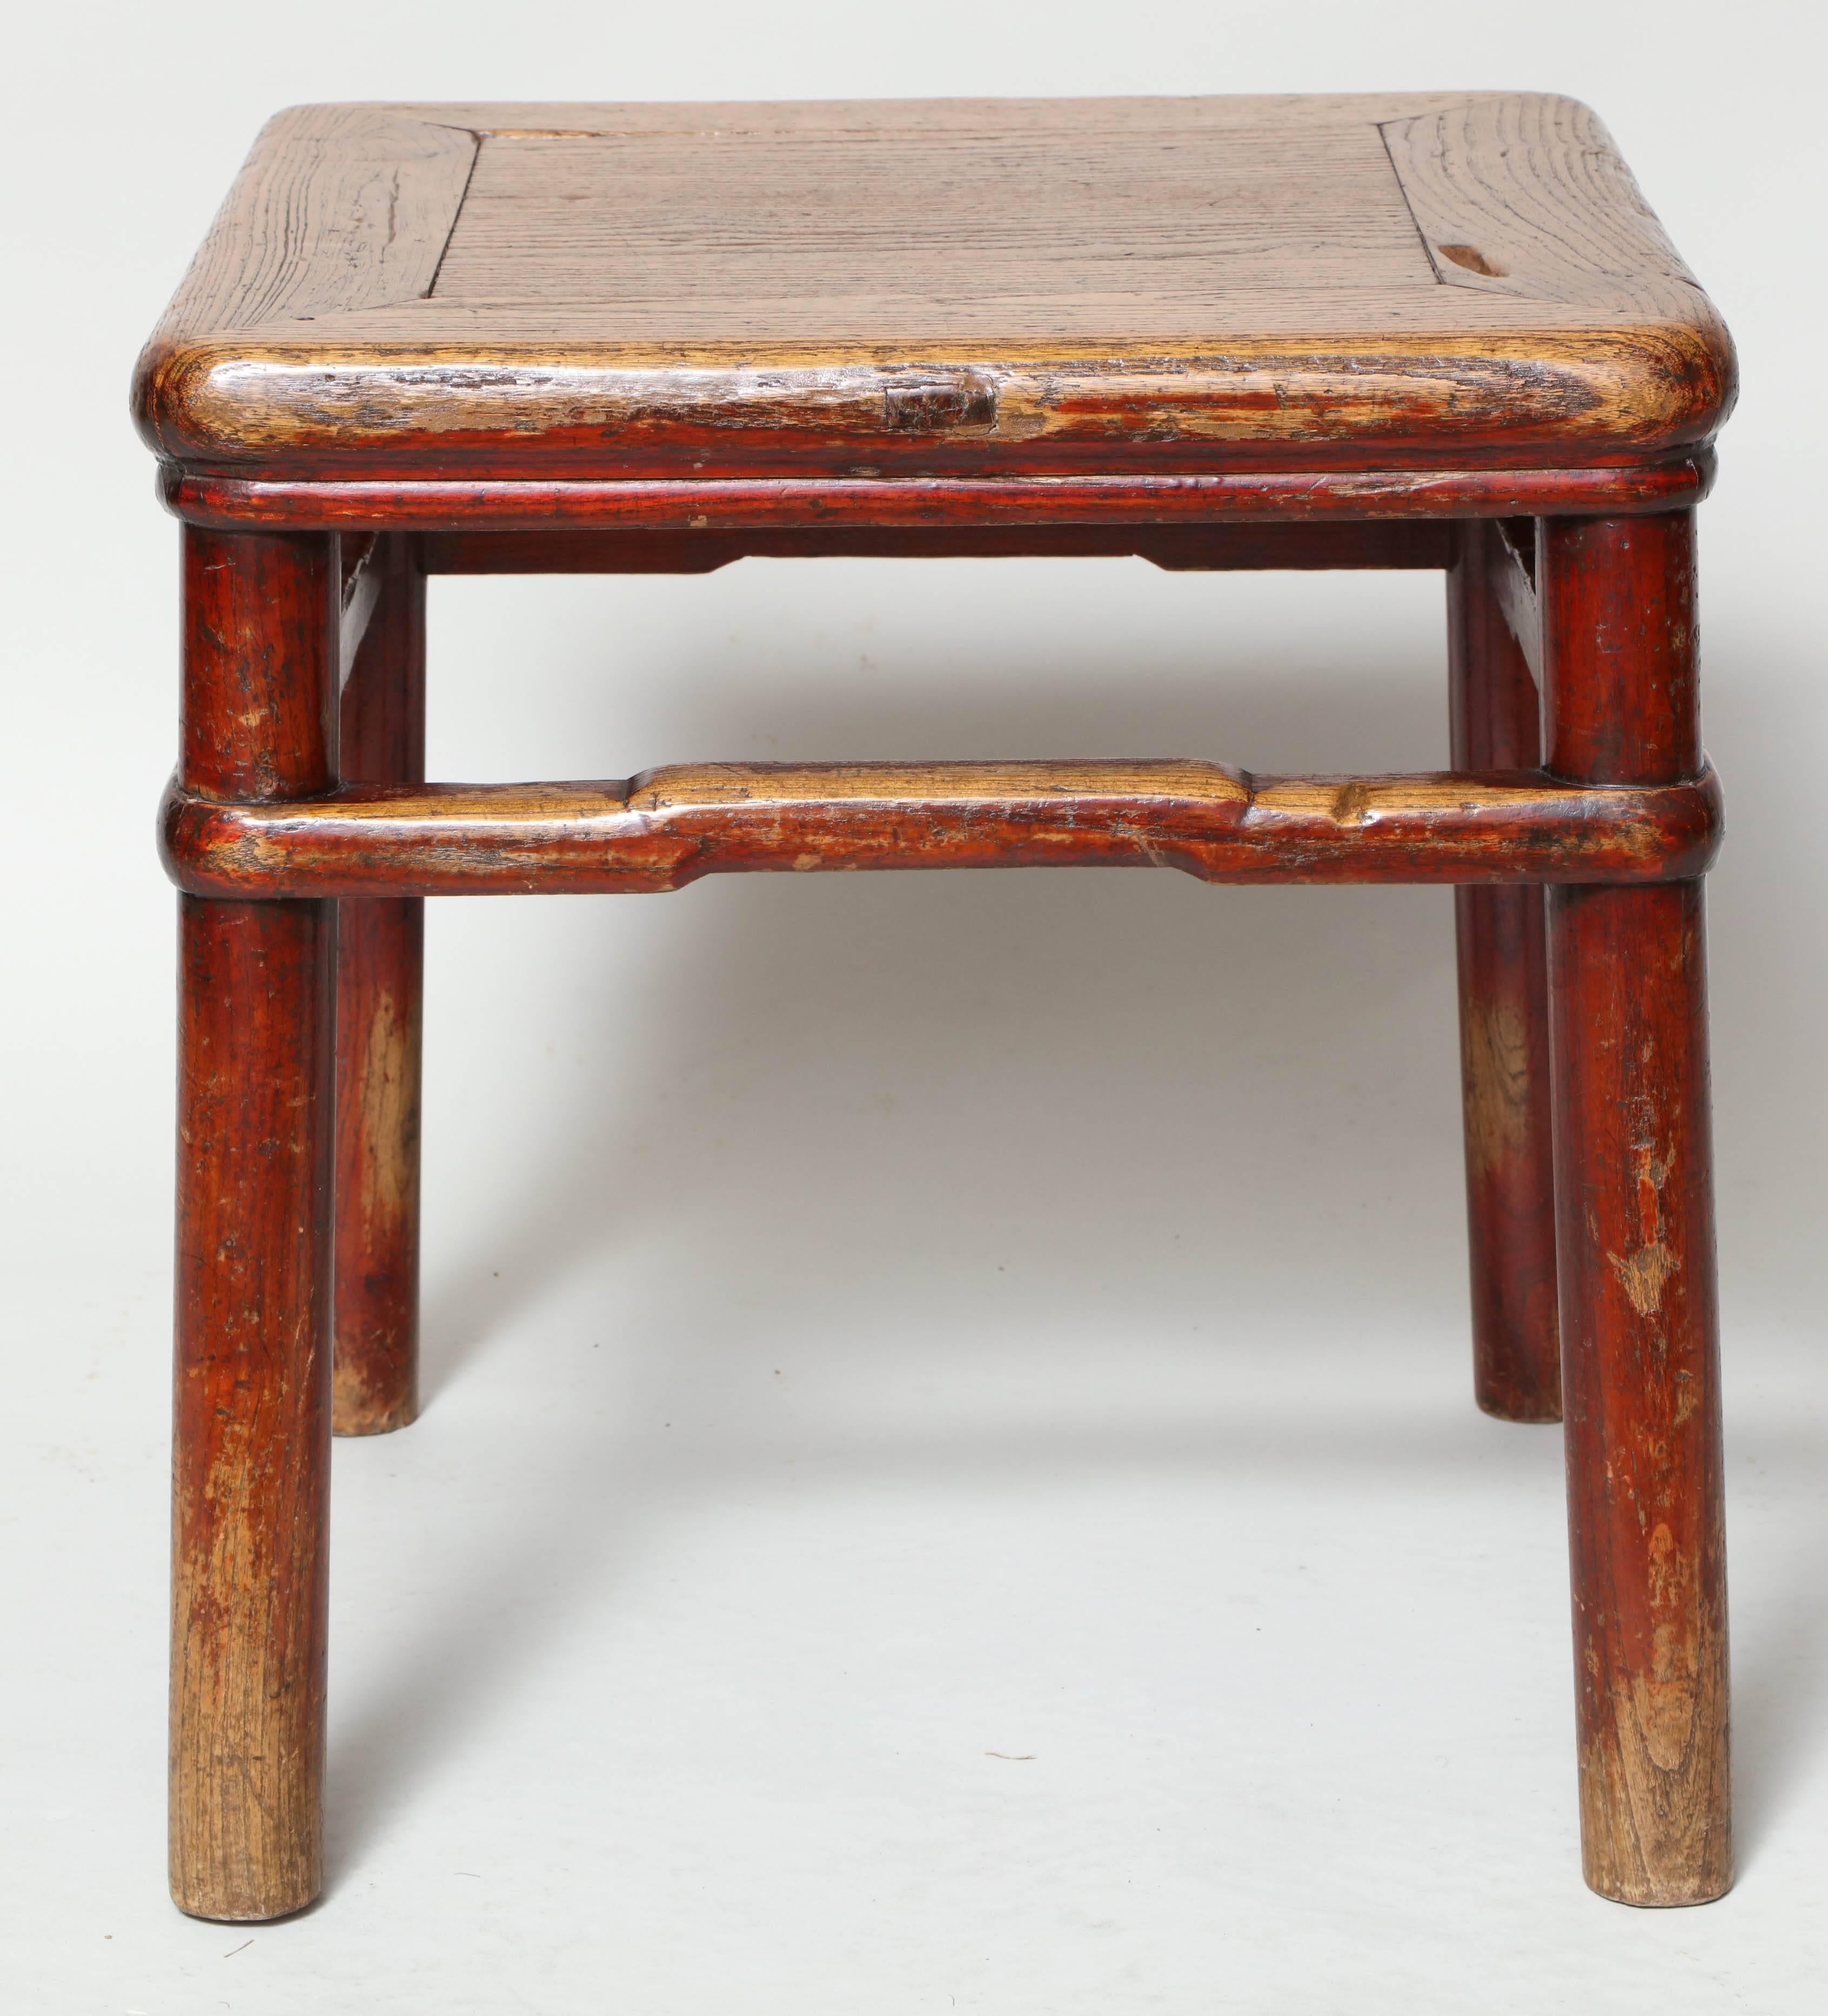 An early 19th century Qing dynasty stool or small table in elm, beautifully crafted of a mitred top with rounded edges on four slightly splayed spoke legs joined by high box stretcher that wraps around each of the legs and features a raised center